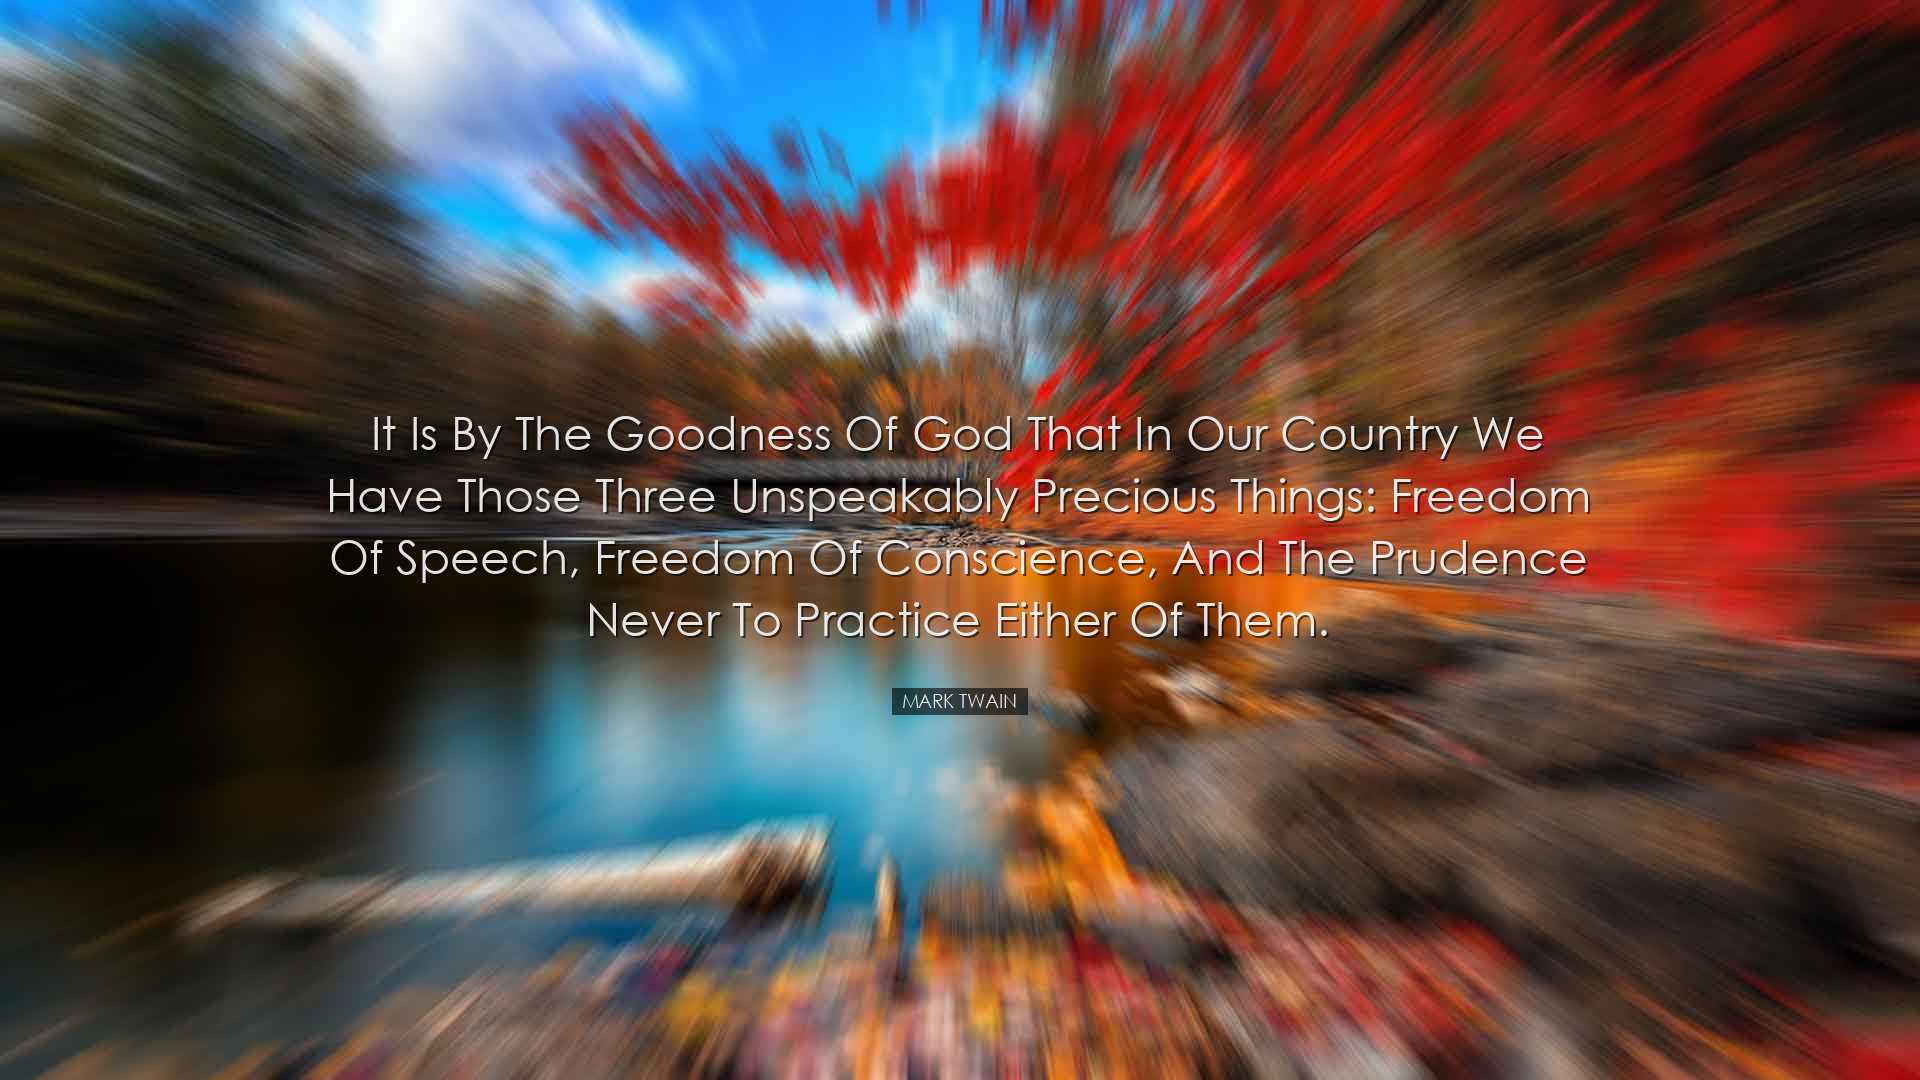 It is by the goodness of God that in our country we have those thr